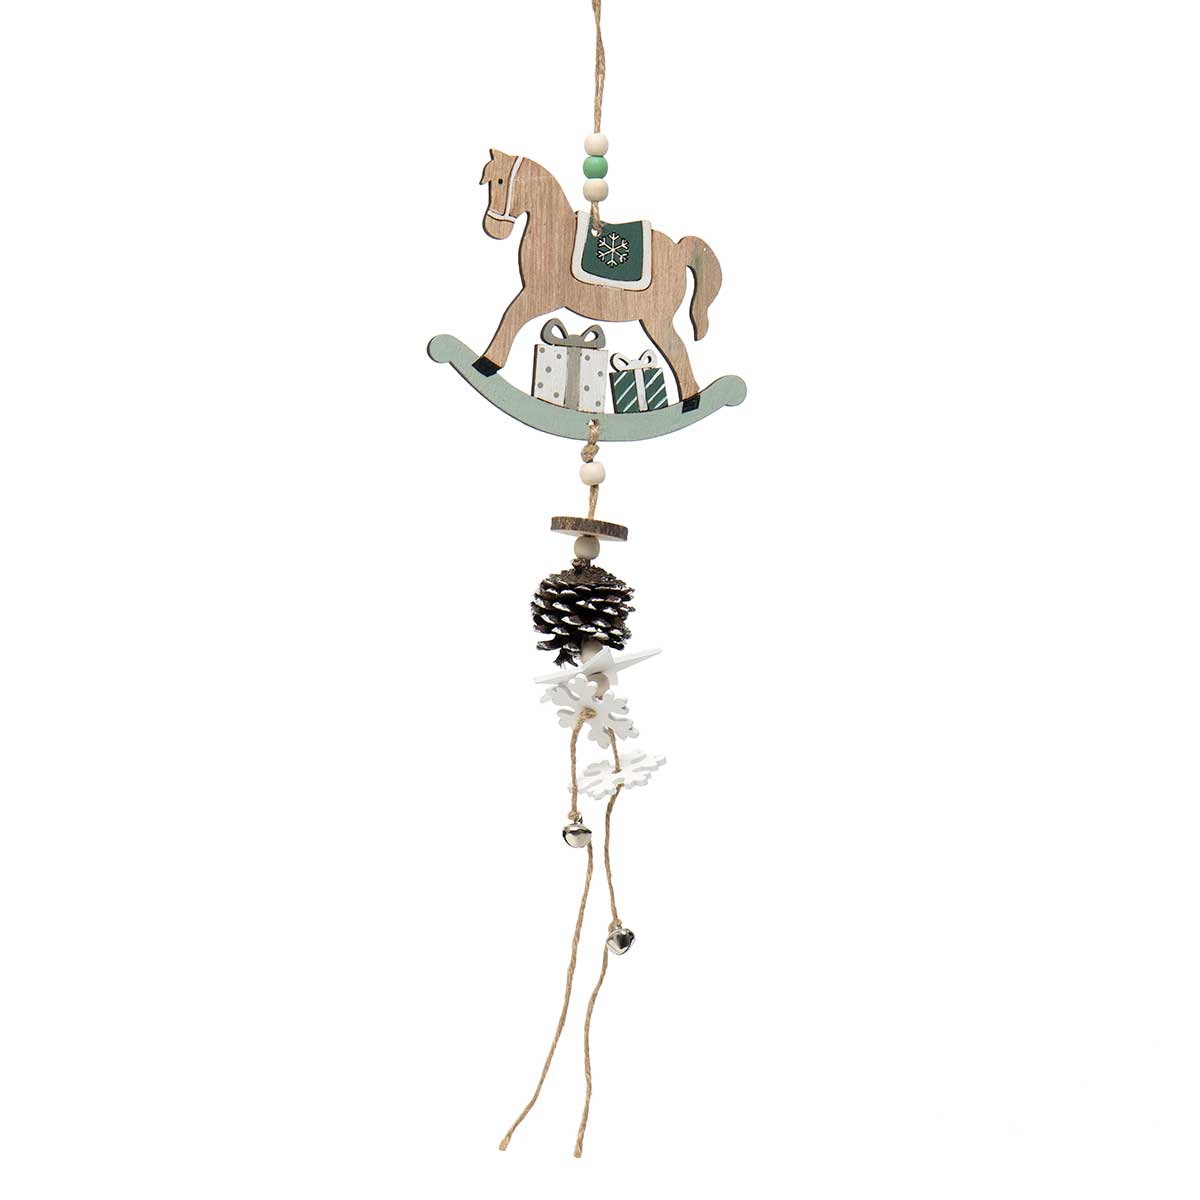 ROCKING HORSE WITH PINECONE, WOOD SNOWFLAKES, BELLS